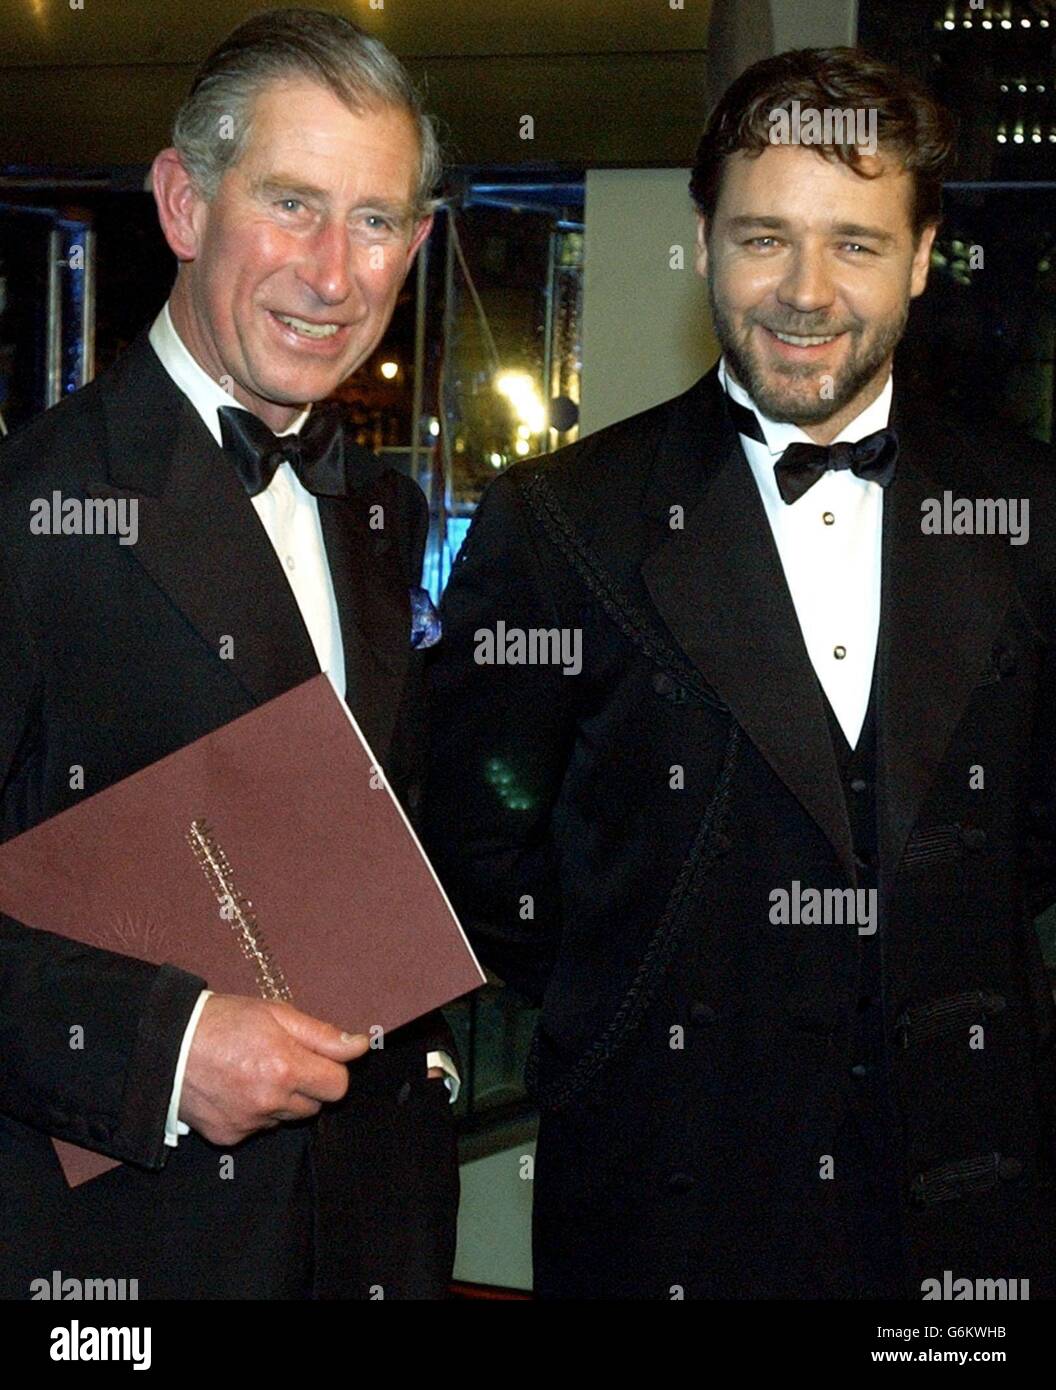 The Prince of Wales (left) with Australian actor Russell Crowe at the Royal Premiere of 'Master and Commander: The Far Side of the World' screened at the Odeon in London's Leicester Square. Stock Photo